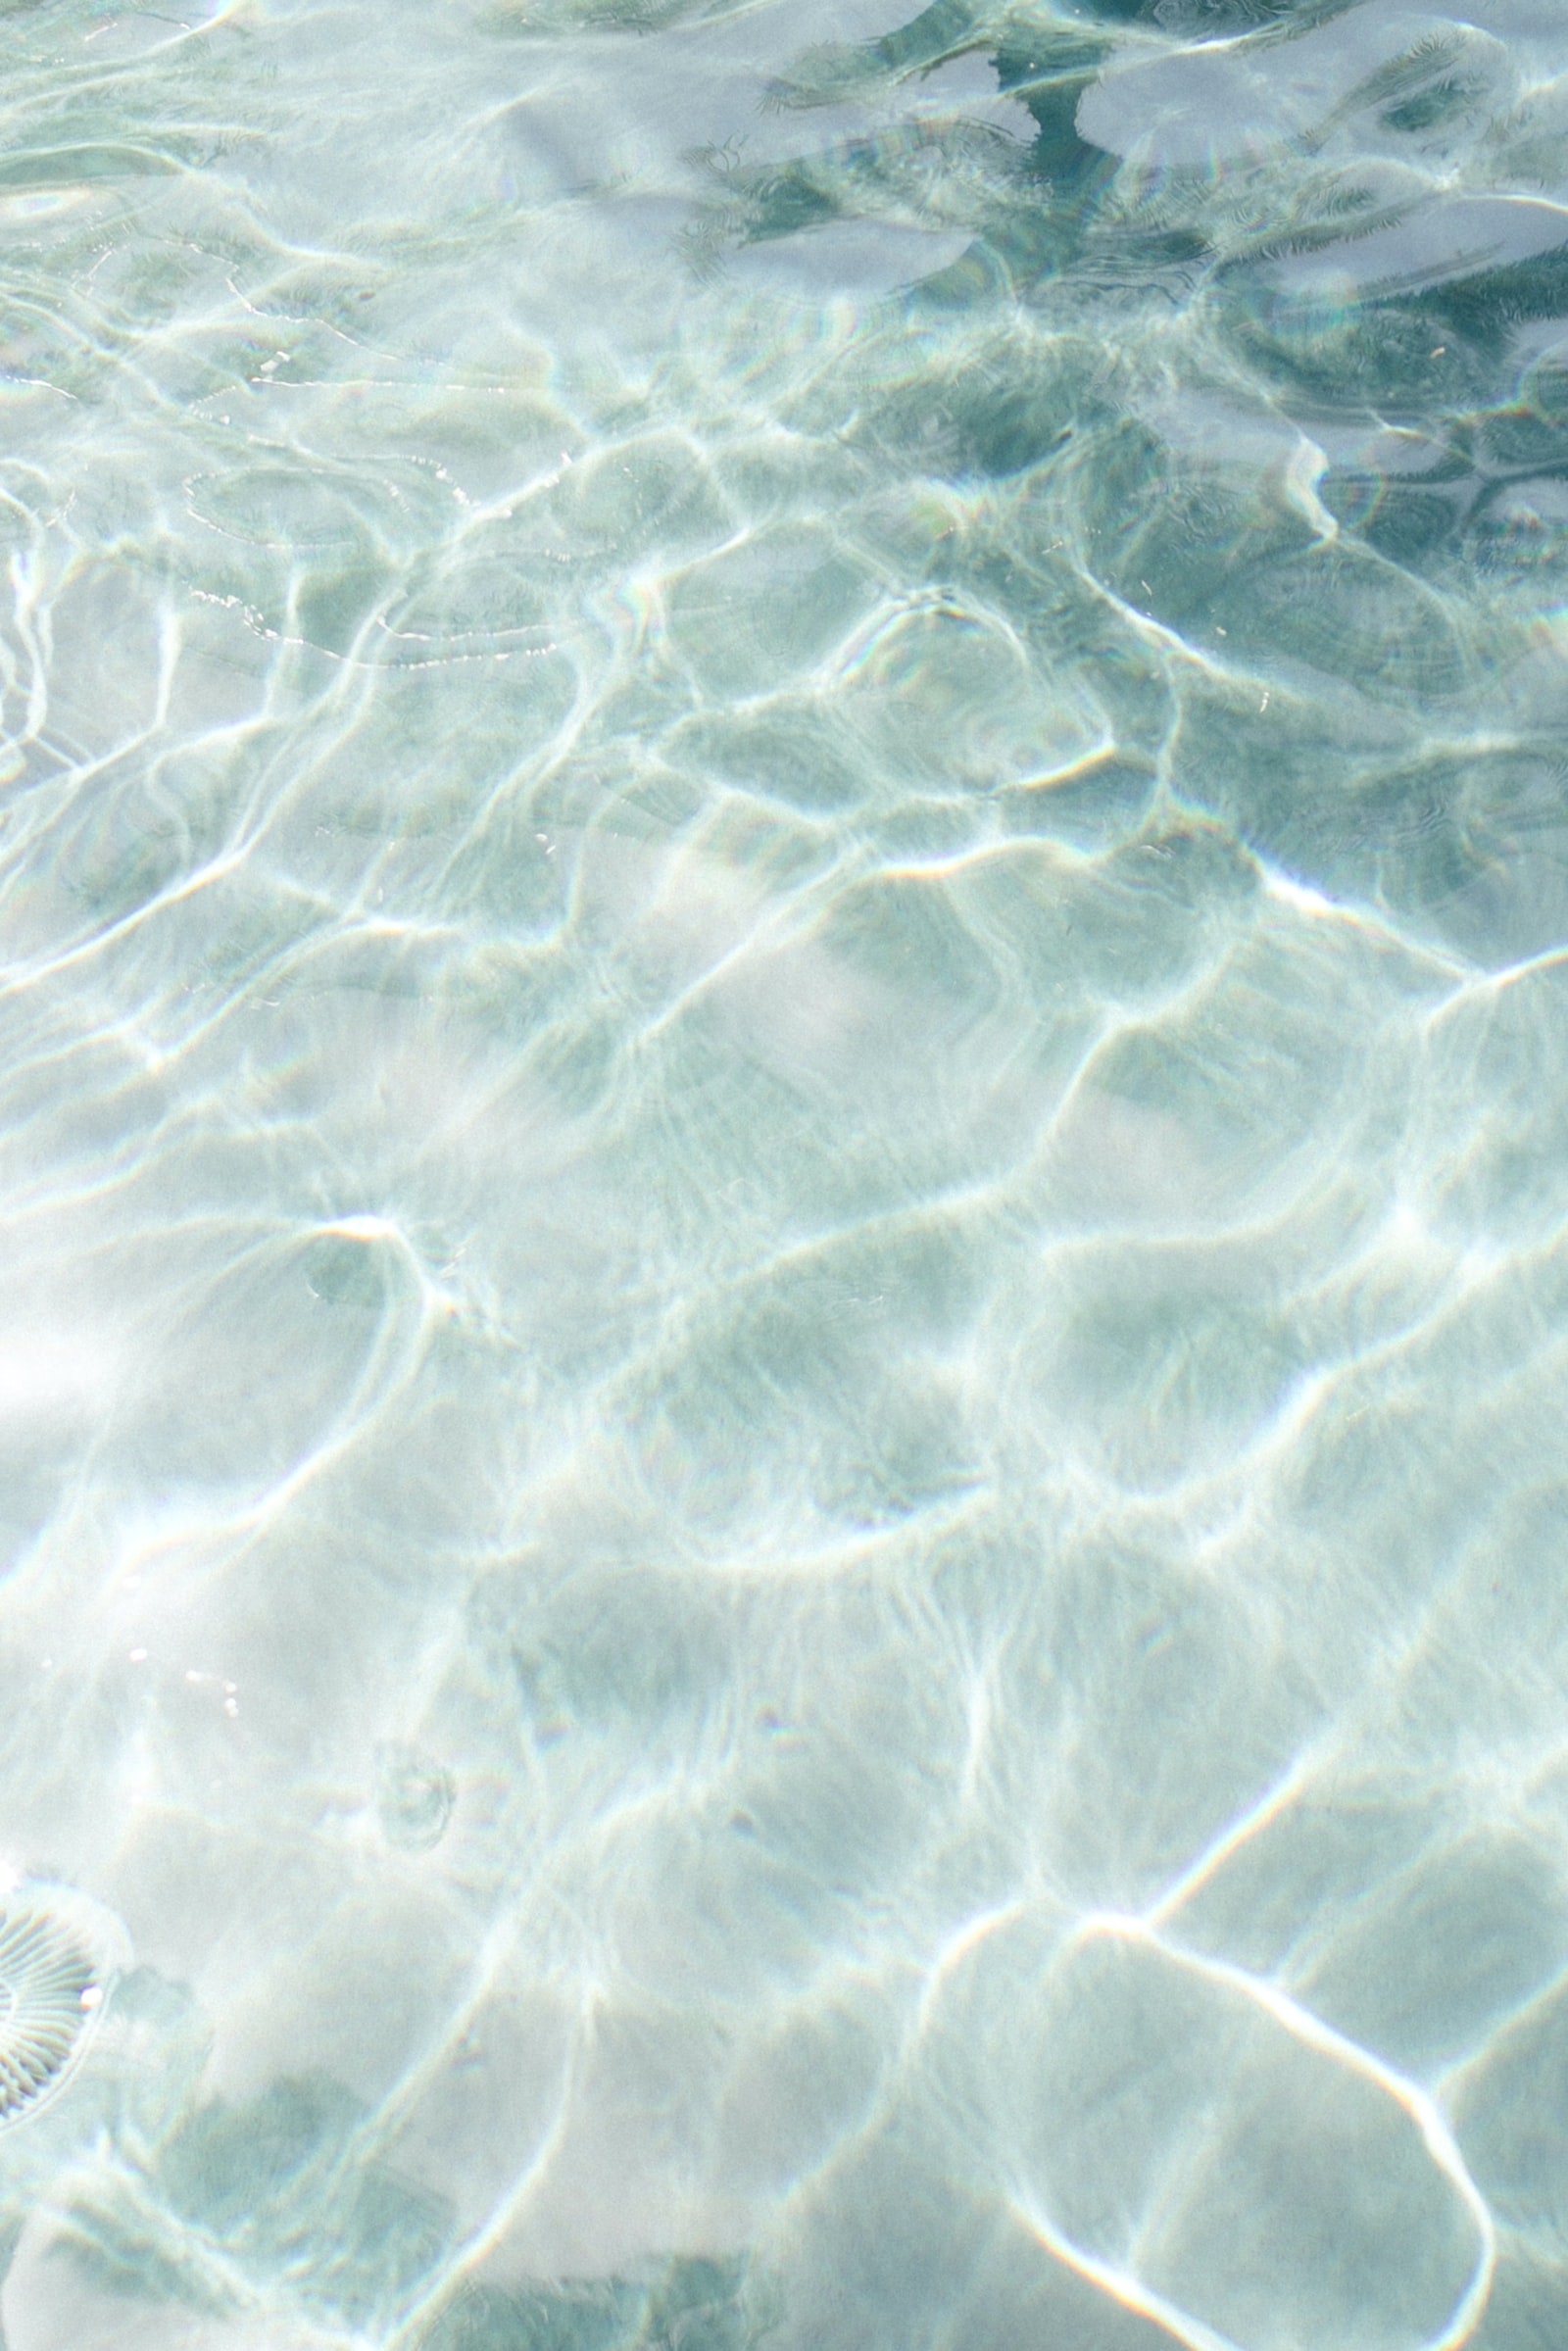 Shot of shallow crystal blue water in the sun